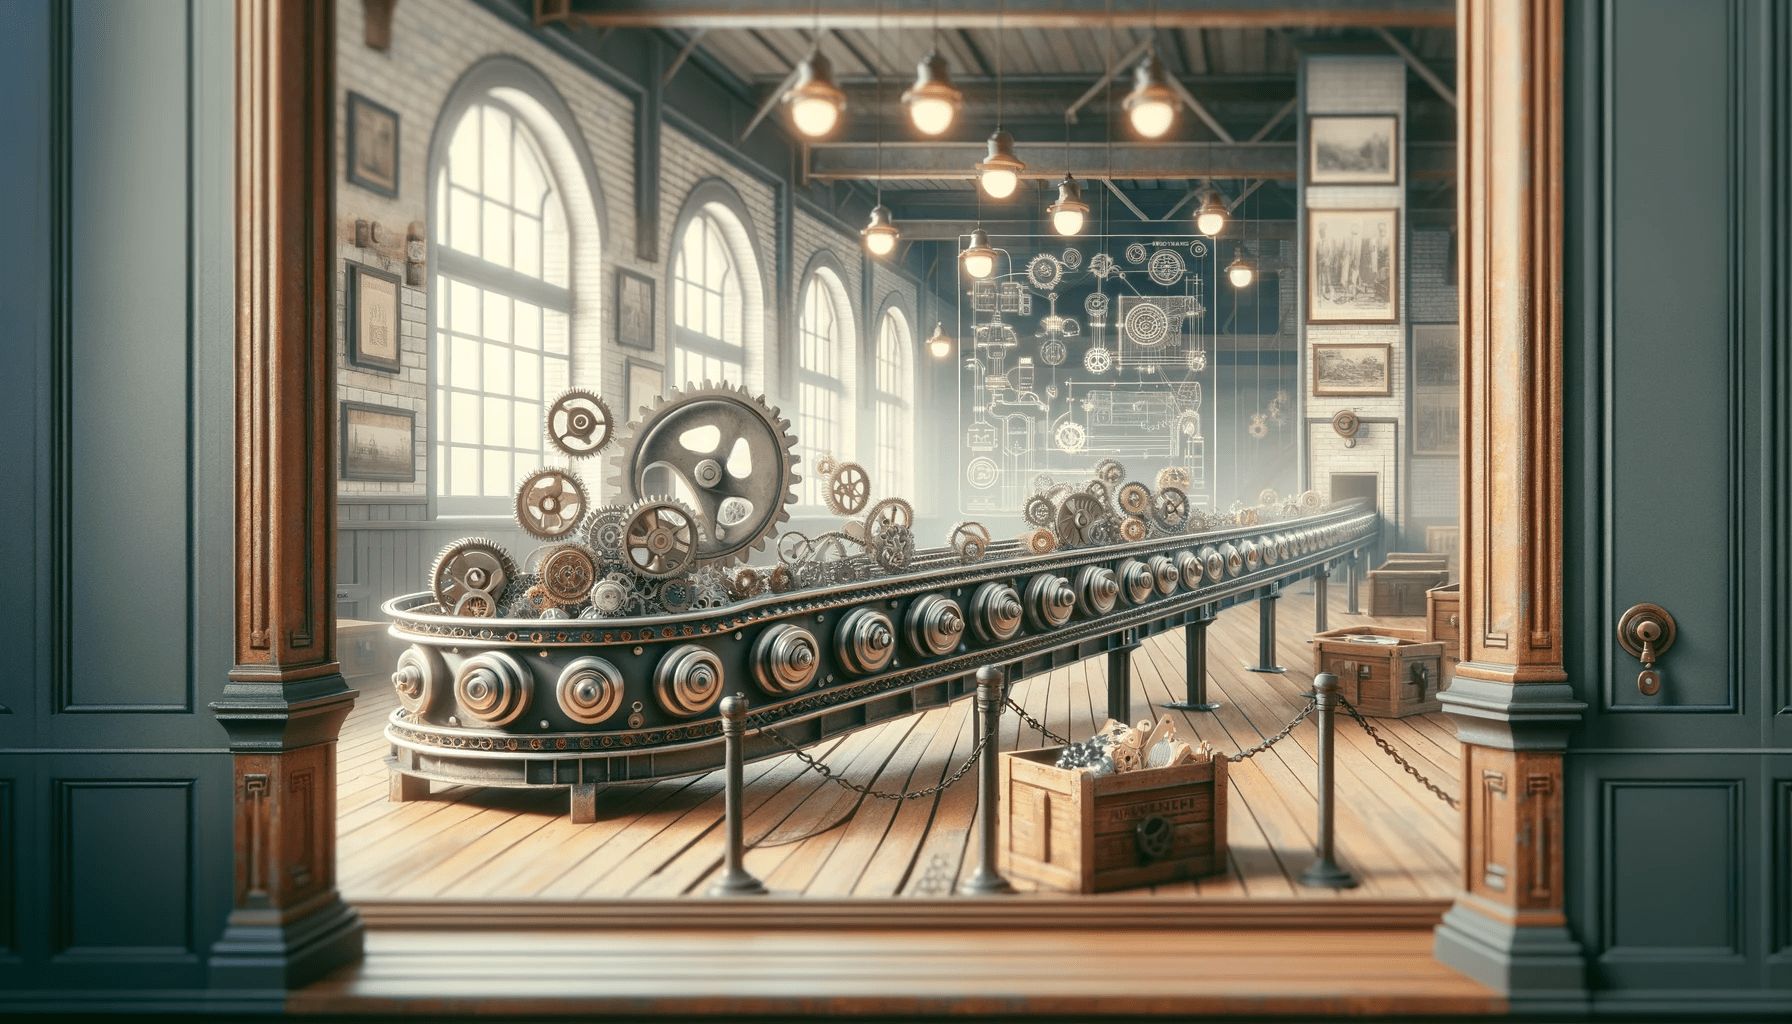 Description: This featured image artistically captures the essence of a bygone industrial era, seamlessly integrated with modern technological elements. At the forefront is a vintage-style conveyor belt adorned with historical artifacts, gears, and mechanical parts, symbolizing the rich tapestry of industrial history. The backdrop features an old museum gallery ambiance, complete with brick walls and classic frames, evoking a sense of historical depth. Subtly interwoven into this traditional setting are symbols like gears and mechanical diagrams, hinting at the integration of contemporary technology into the exhibit.